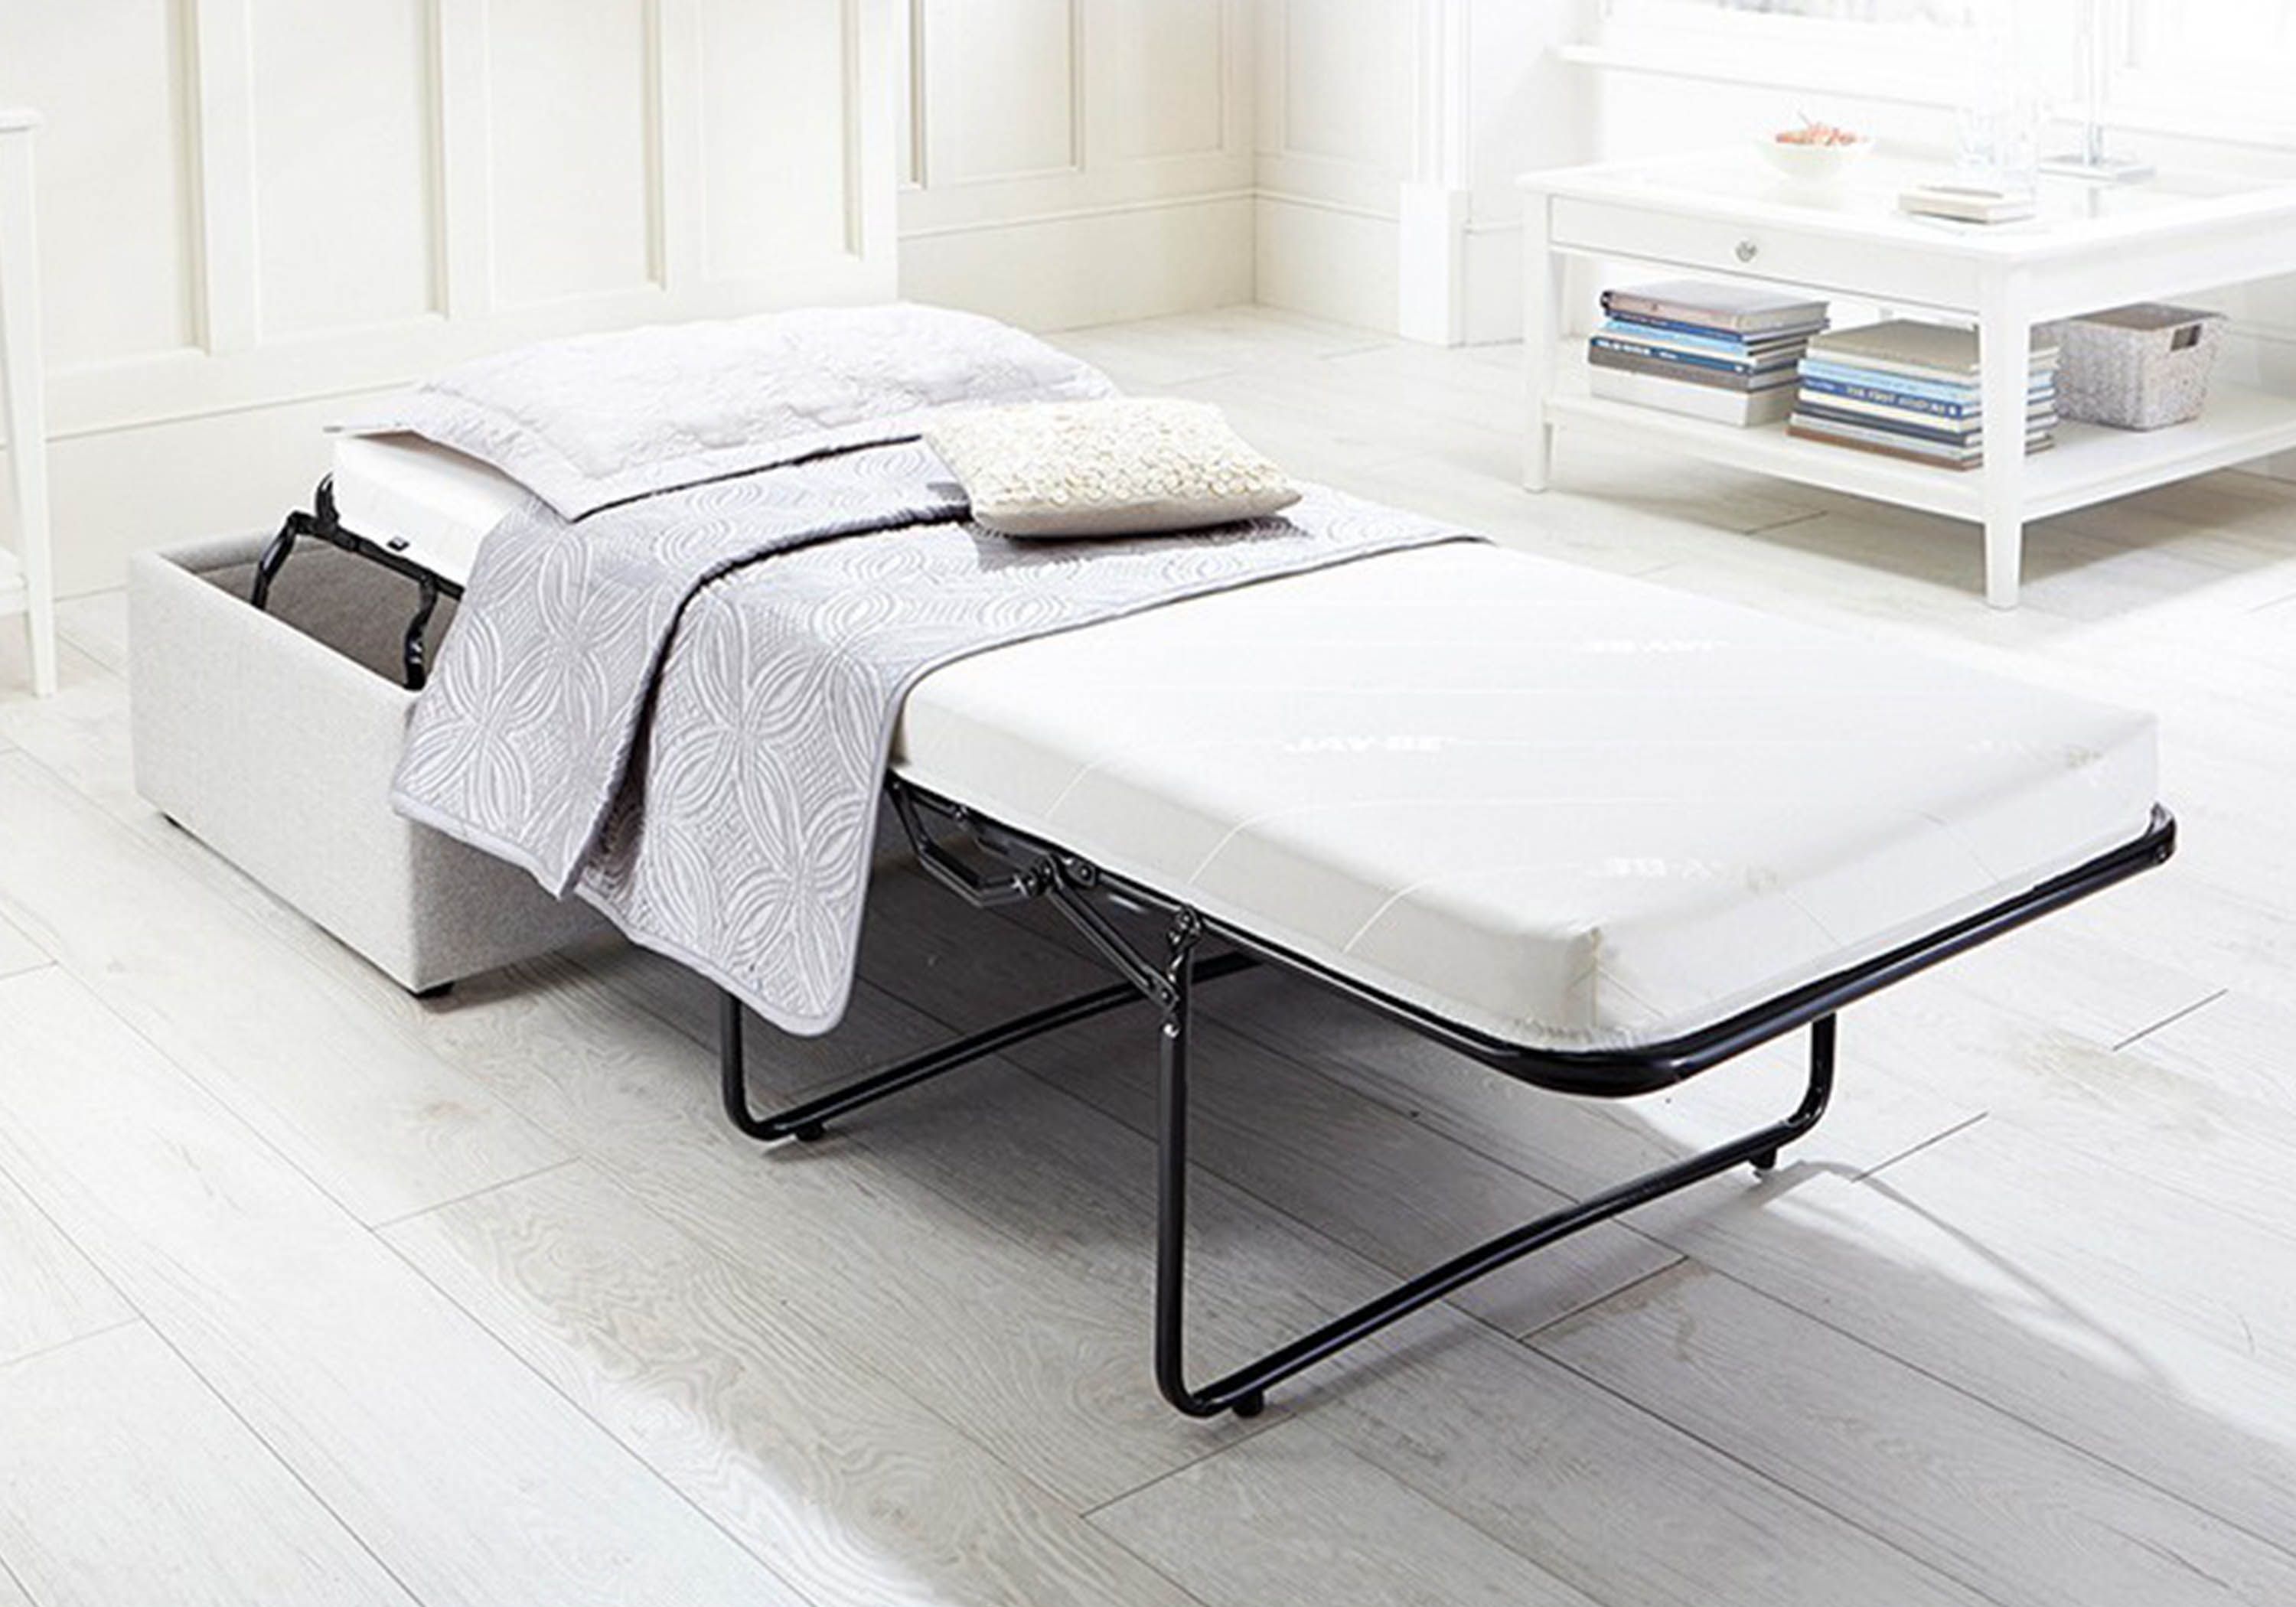 Footstool guest bed